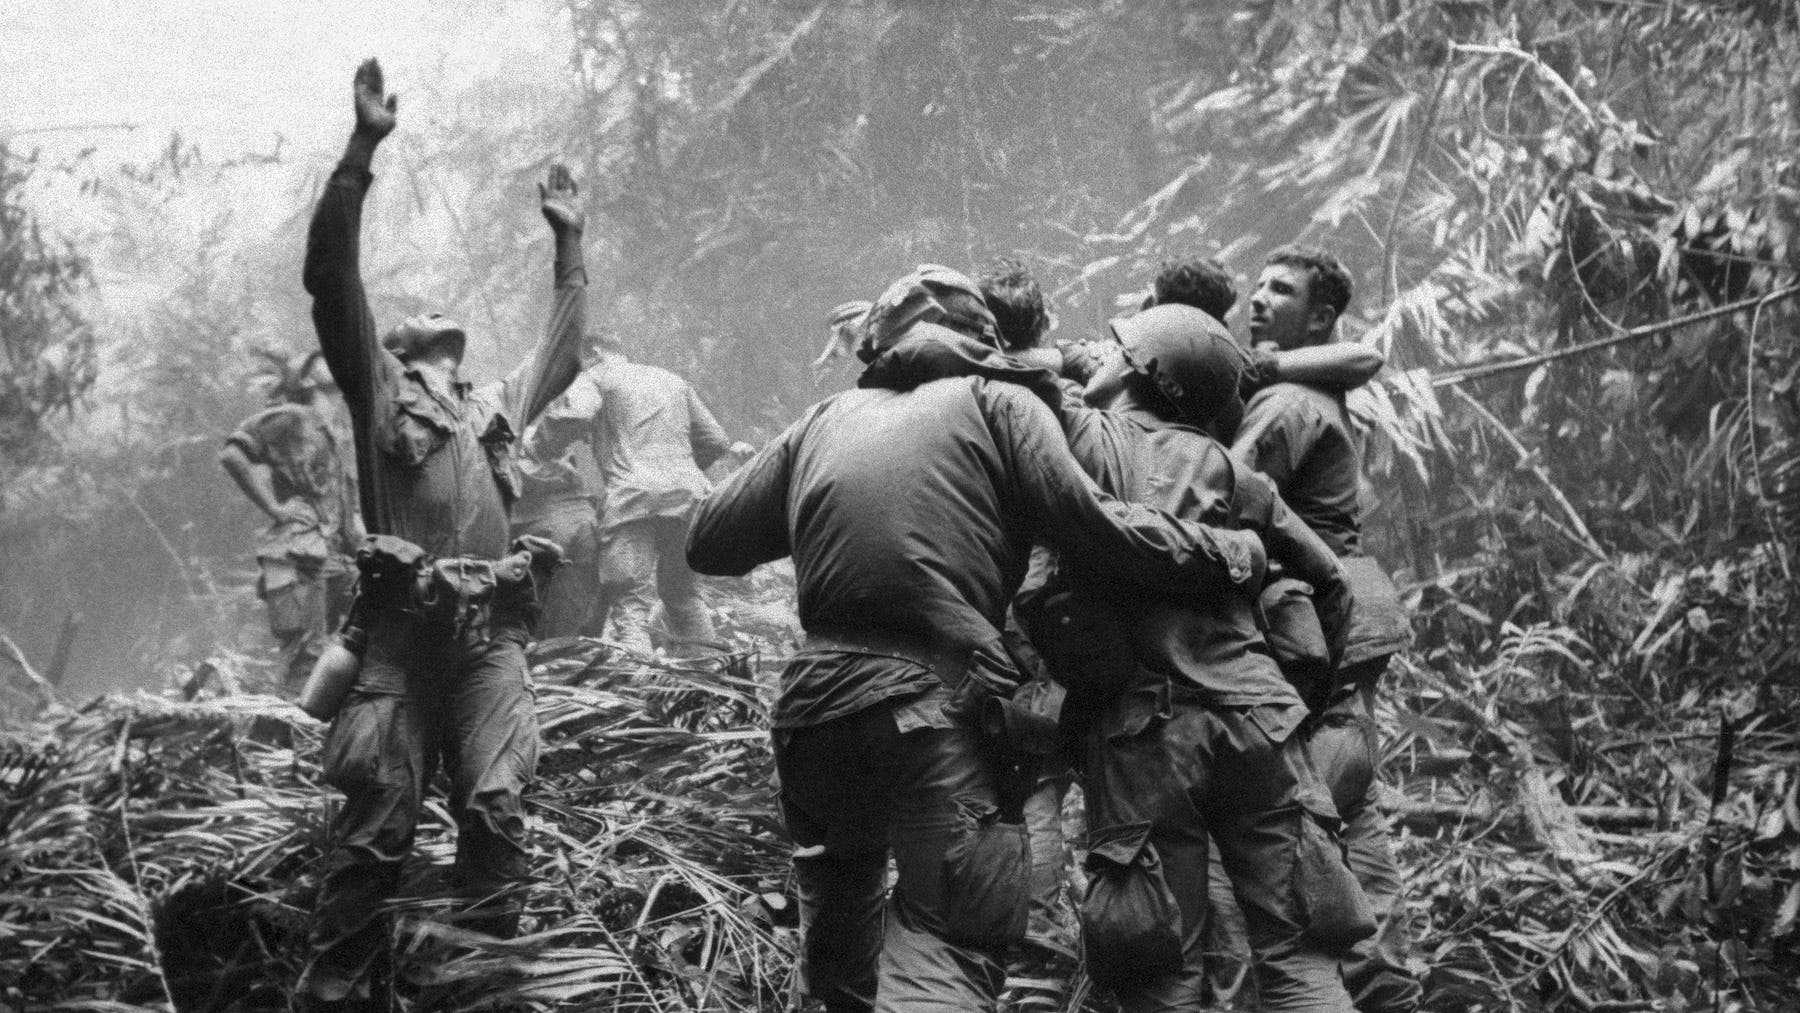 This April 1968 file photo shows the first sergeant of A Company, 101st Airborne Division, guiding a medevac helicopter through the jungle foliage to pick up casualties suffered during a five-day patrol near Hue.